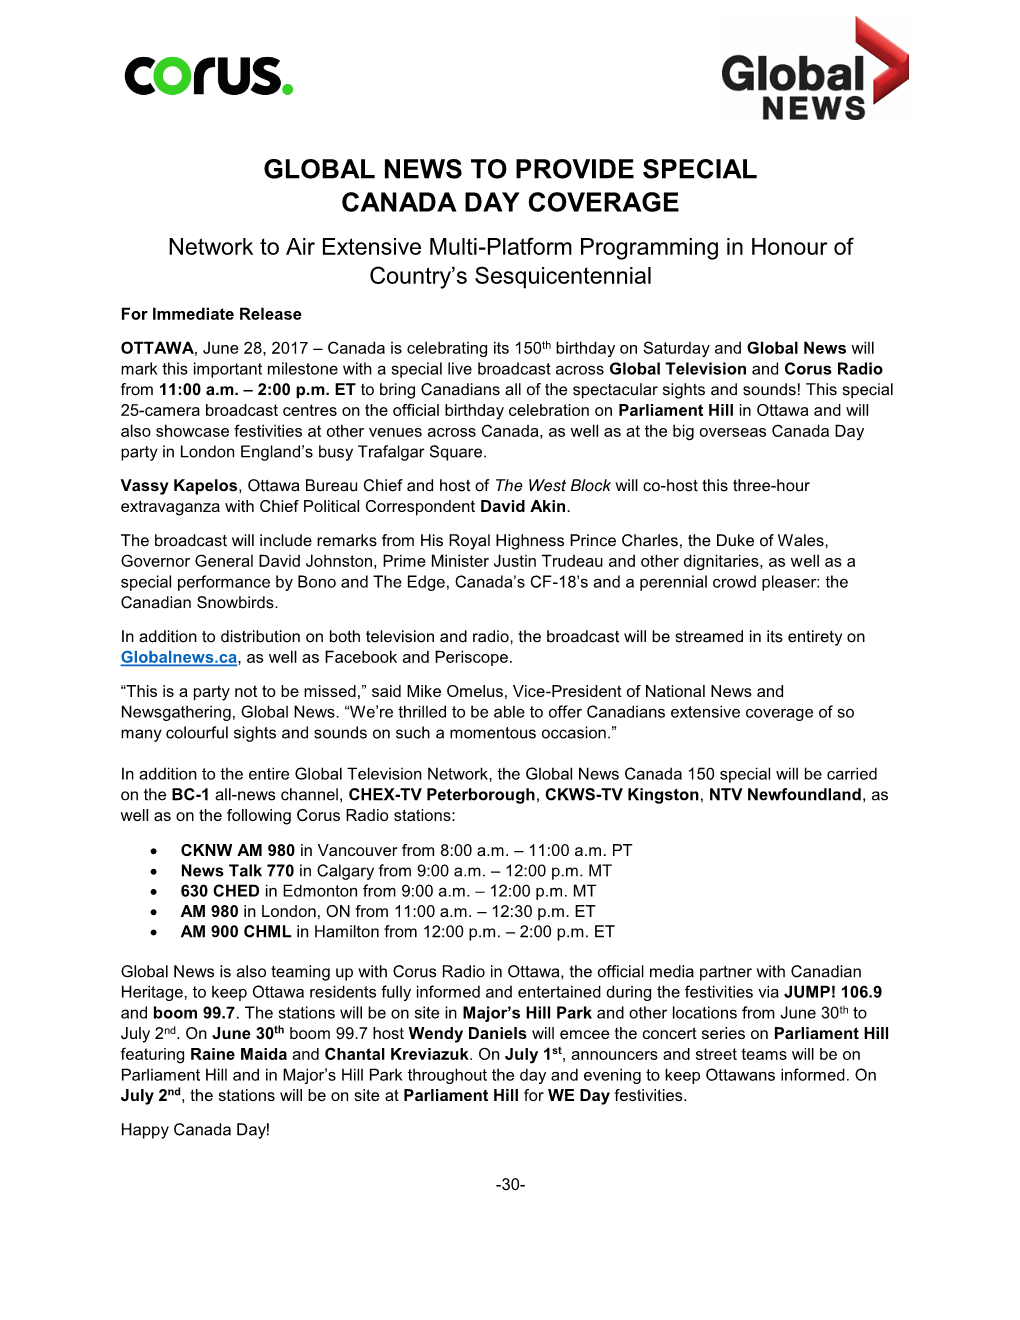 GLOBAL NEWS to PROVIDE SPECIAL CANADA DAY COVERAGE Network to Air Extensive Multi-Platform Programming in Honour of Country’S Sesquicentennial